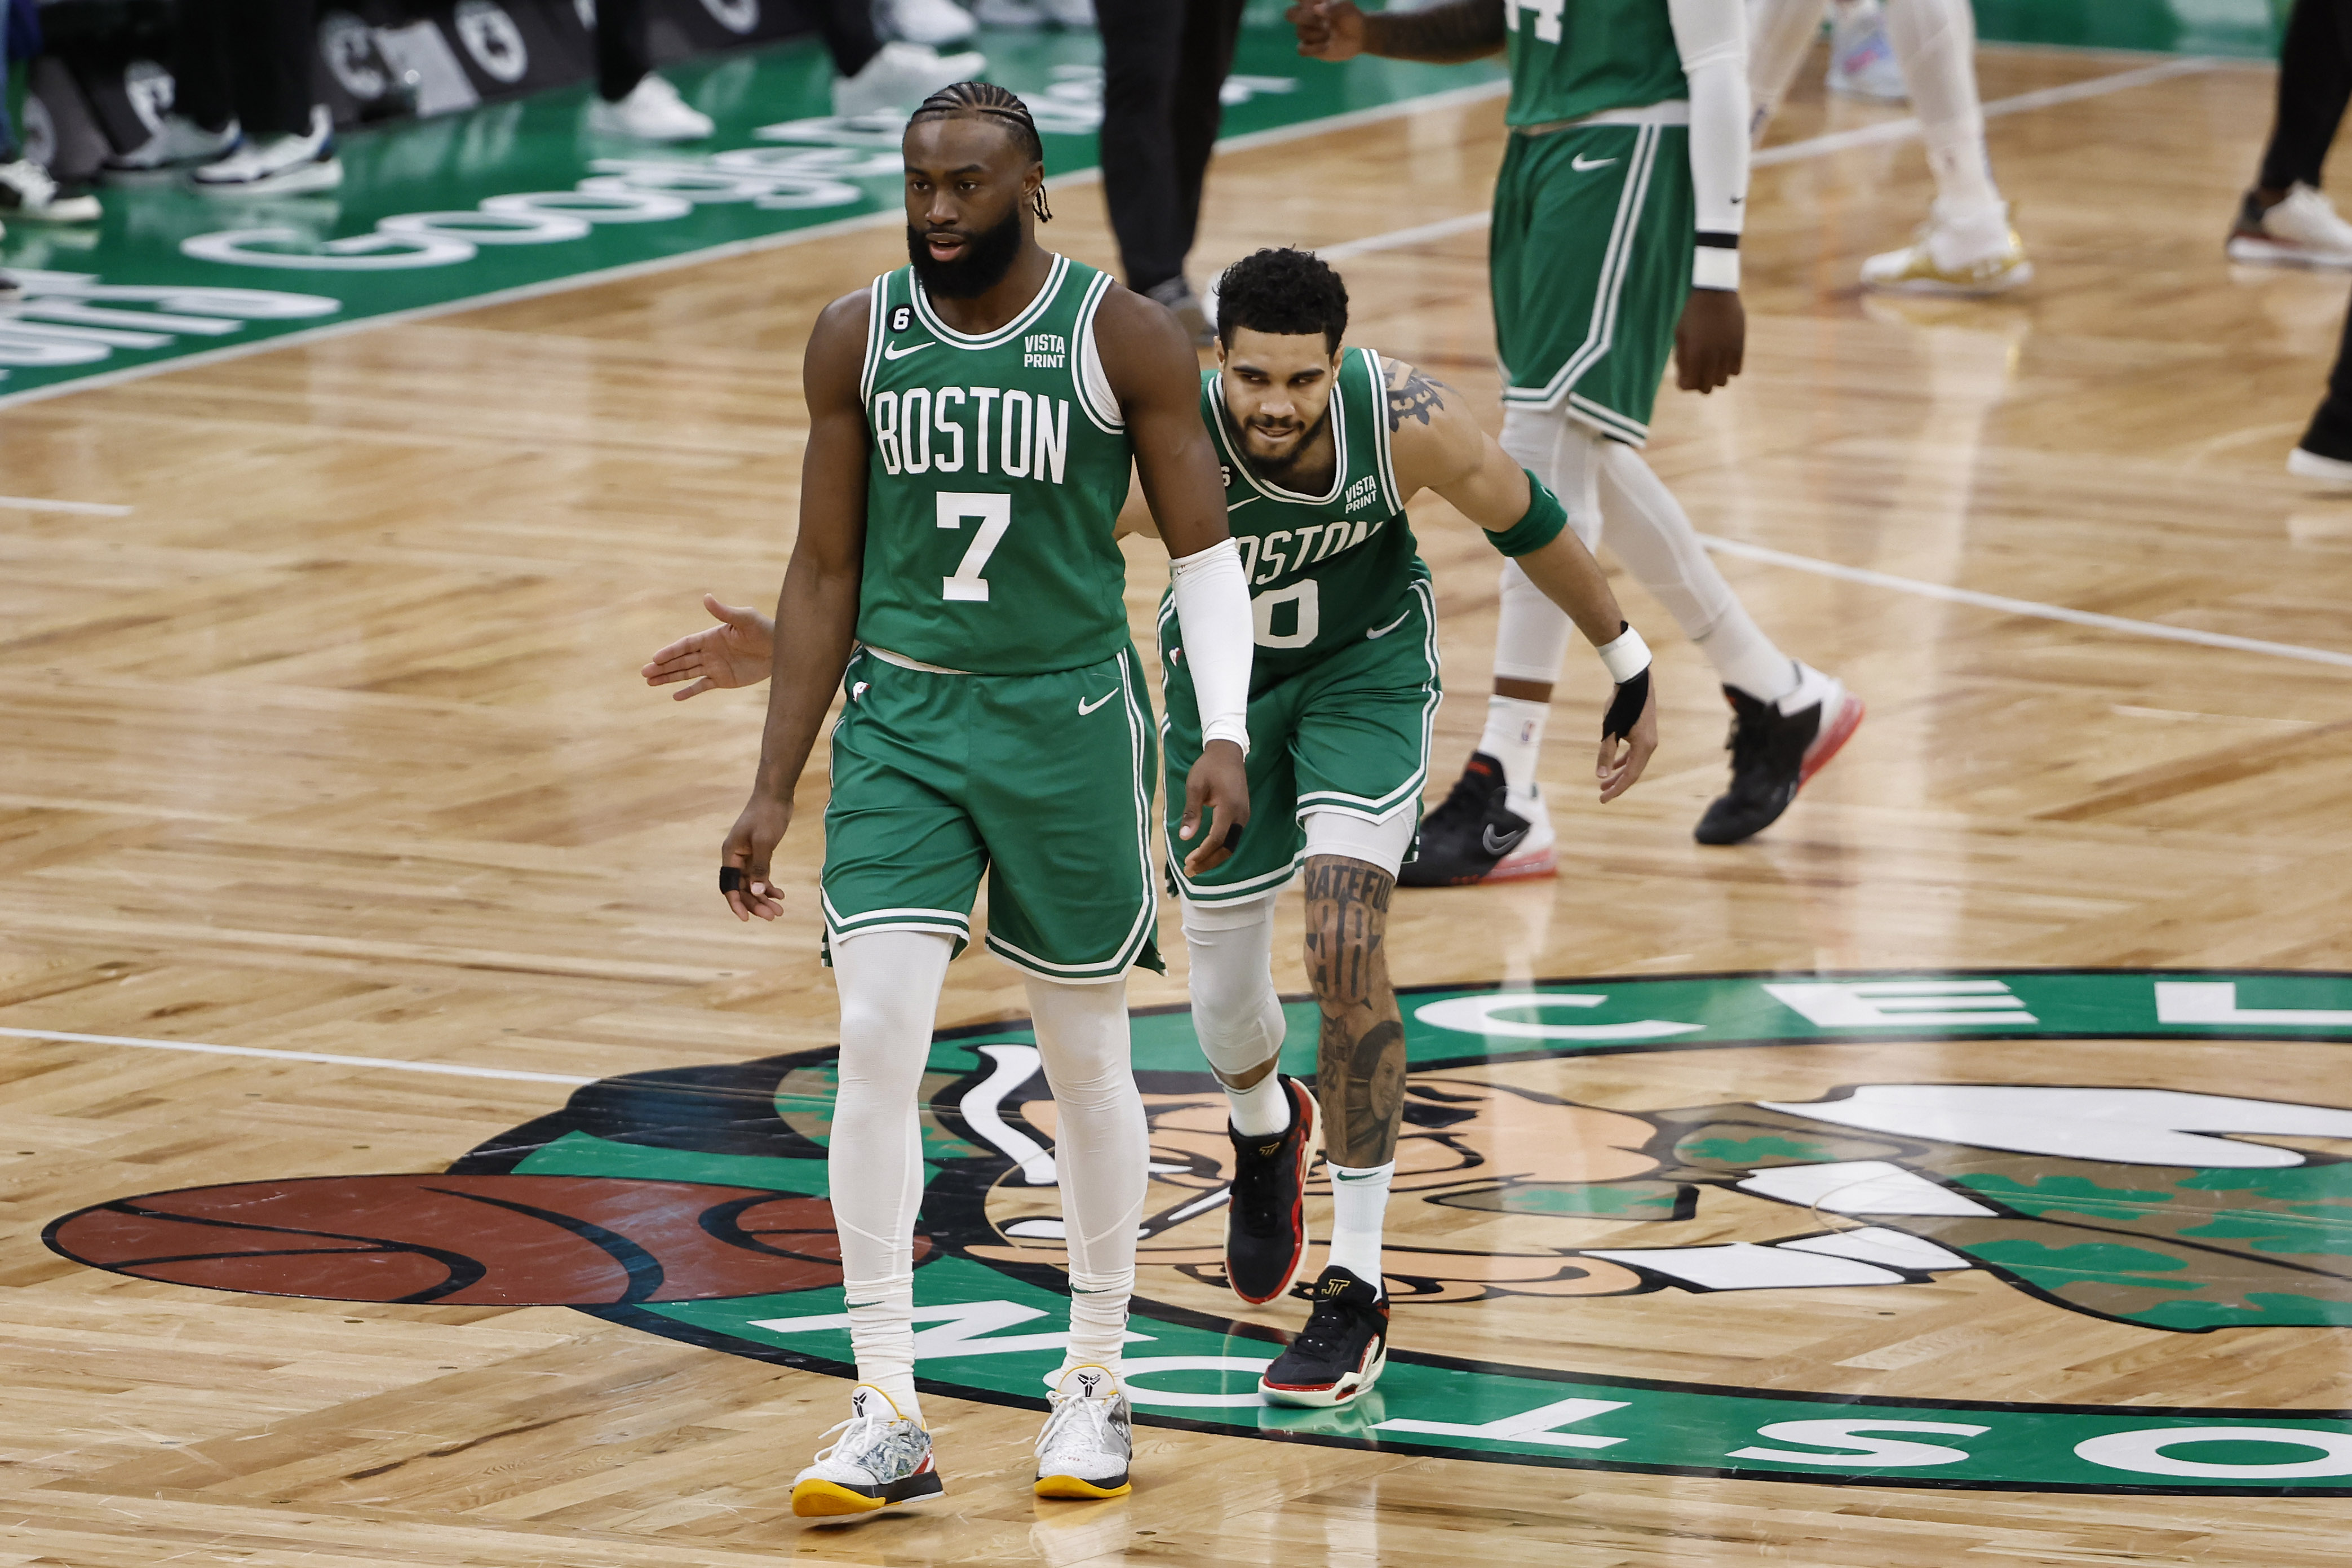 Boston Celtics forward Jayson Tatum (0) pats guard Jaylen Brown (7) after a basket against the Philadelphia 76ers during the second half of game seven of the 2023 NBA playoffs at TD Garden.